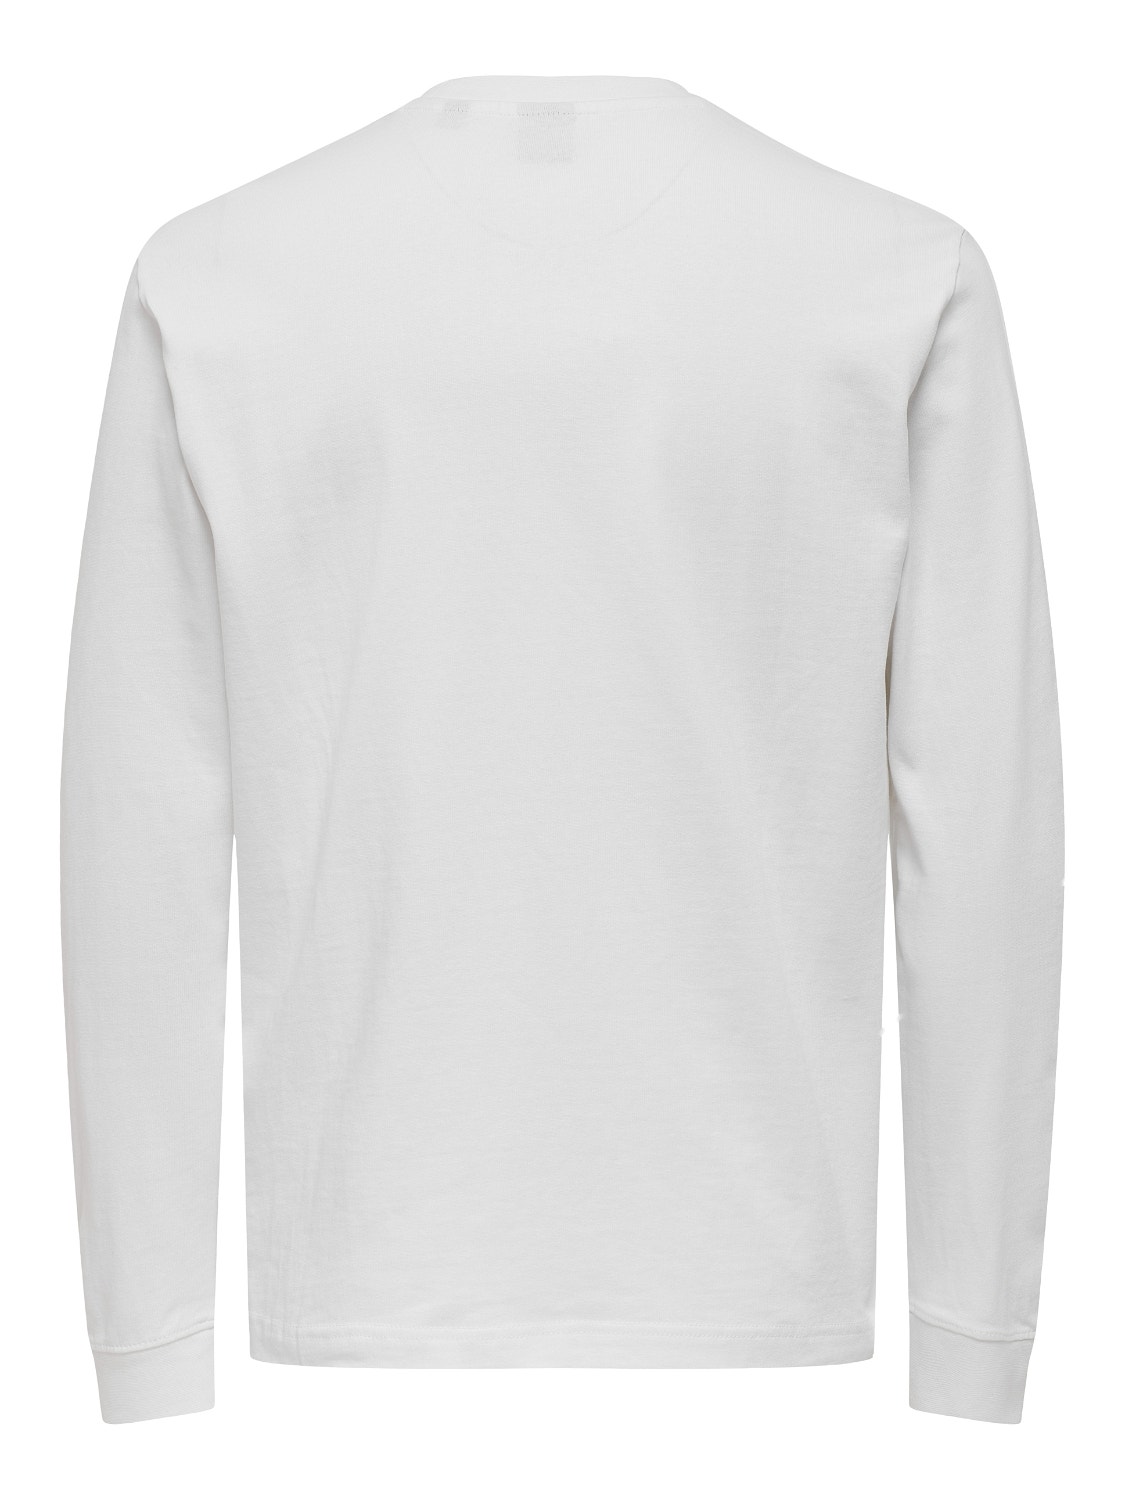 ONLY & SONS Regular fit O-hals T-shirts -Bright White - 22021335